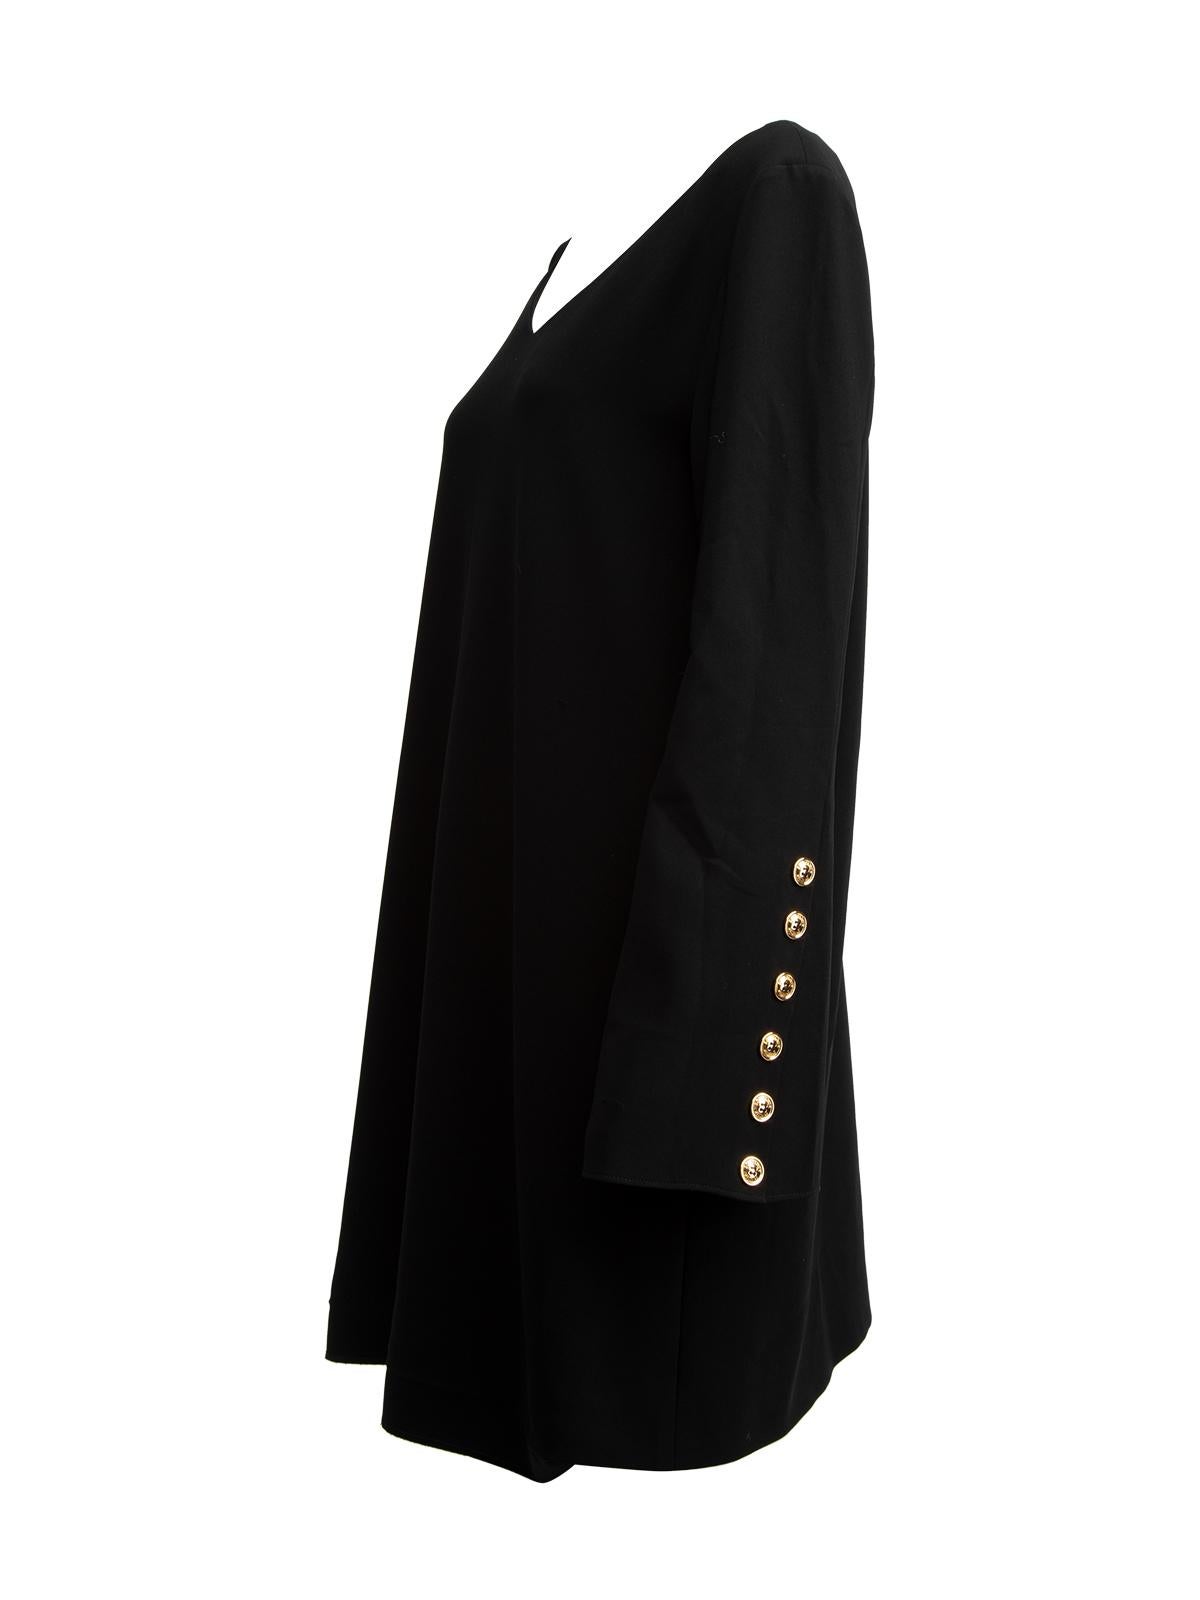 Pre-Loved Boutique Moschino Women's Long Sleeved Dress with Gold Button Detail 1